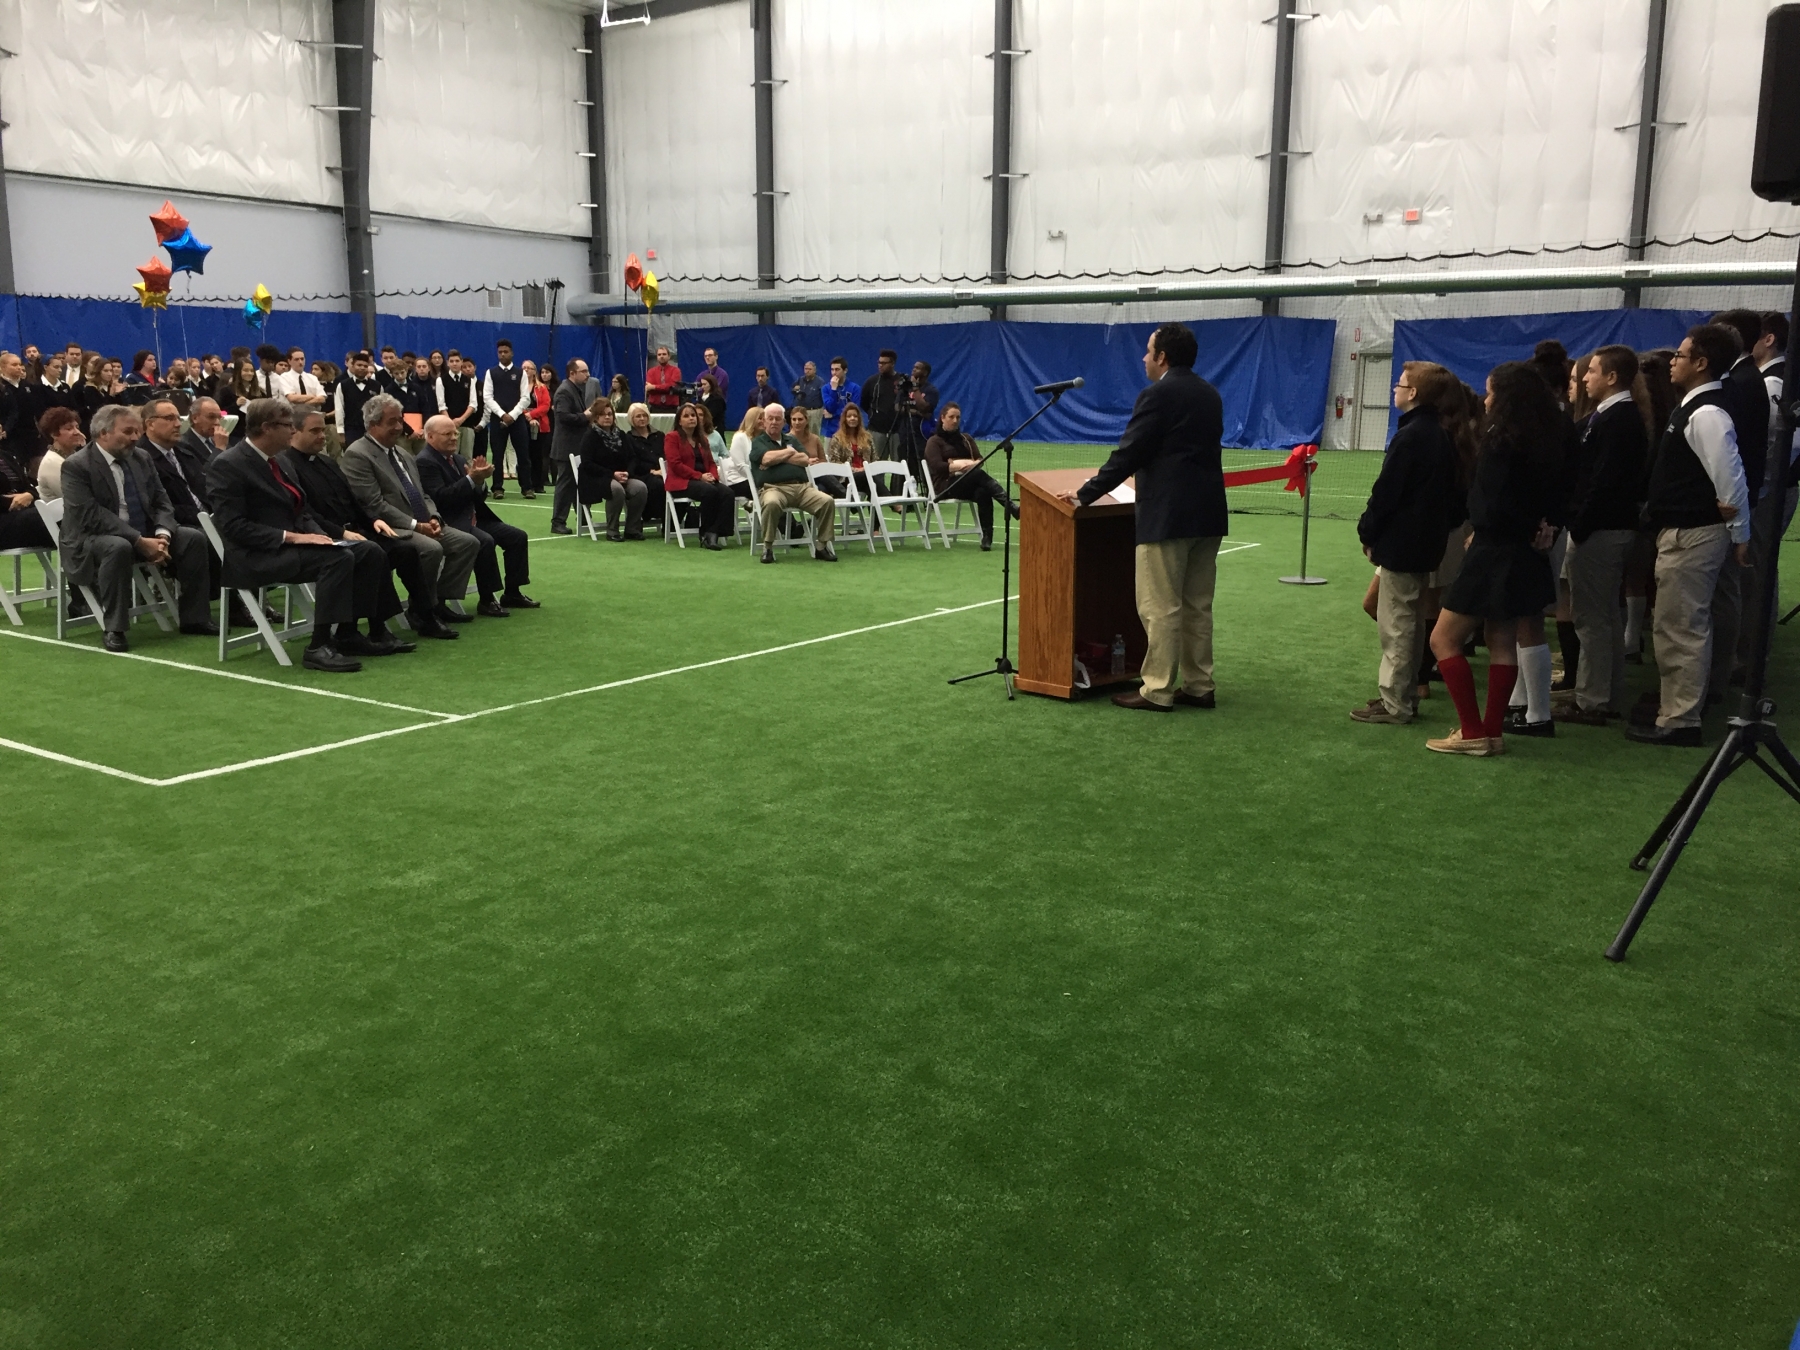 Students from Niagara Catholic Junior and Senior High School attend a ribbon cutting ceremony for The Niagara Community Center behind their school.